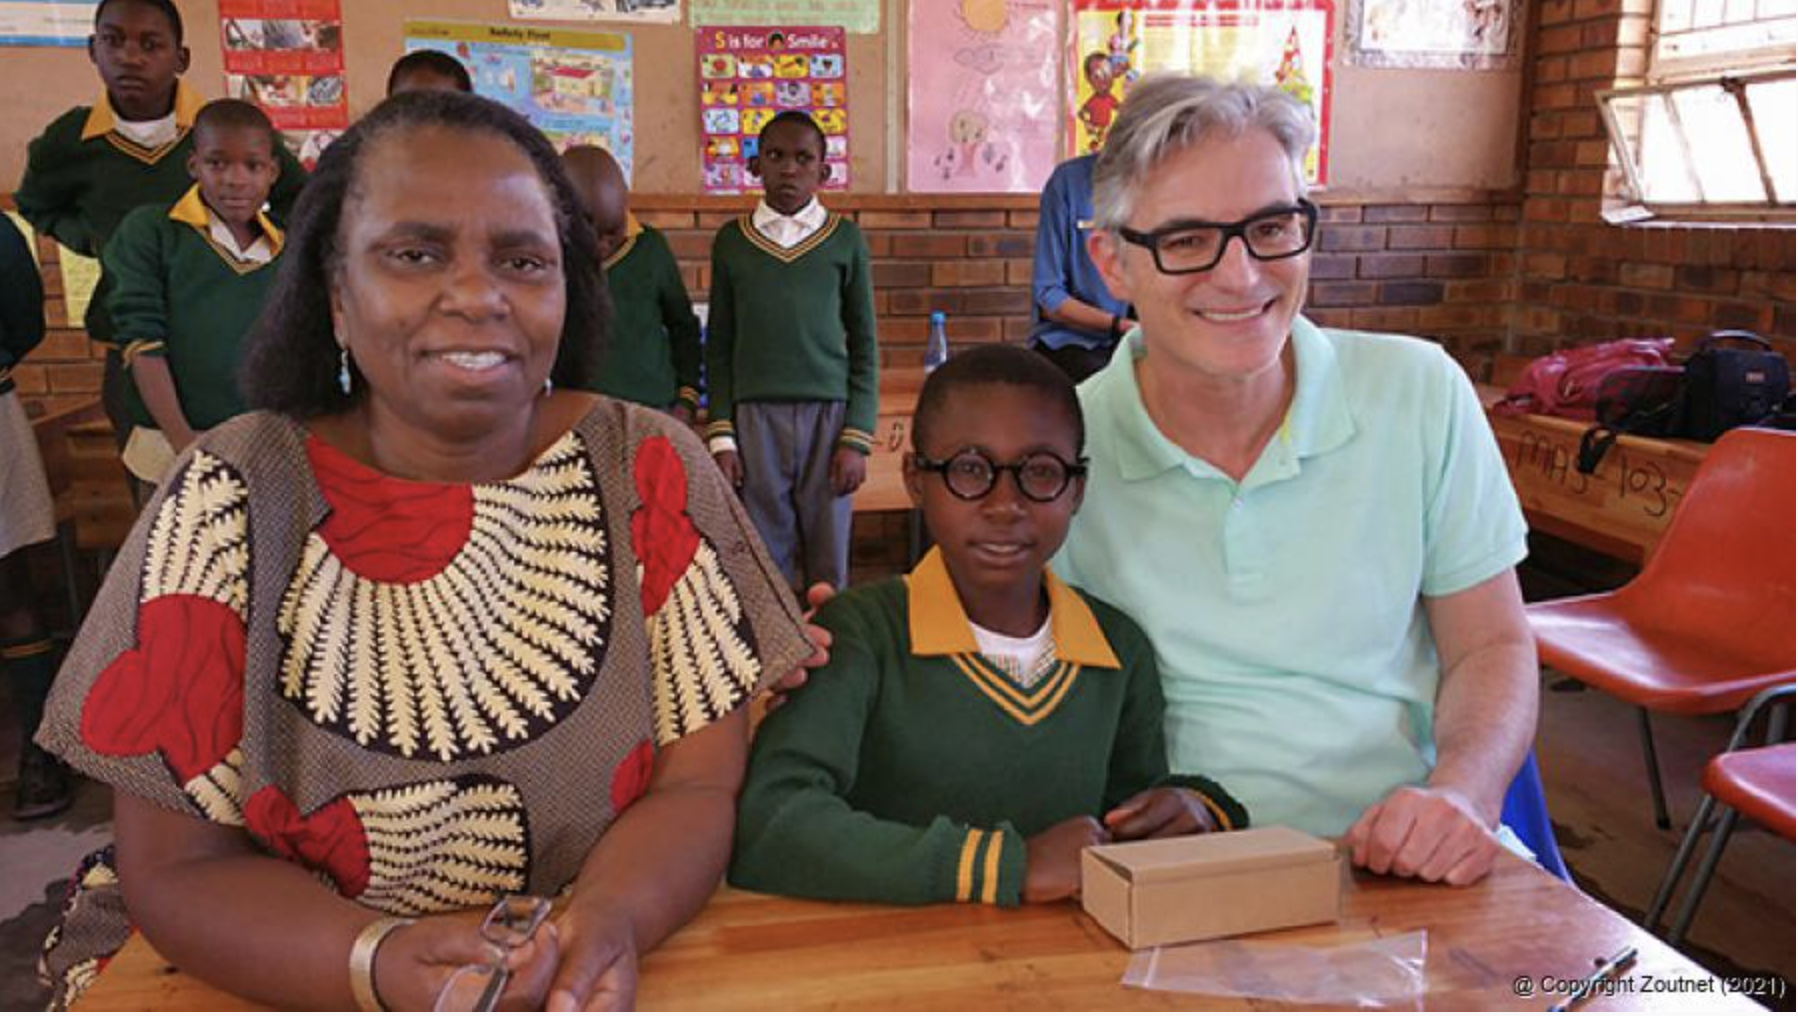 Koen van Pottelbergh (right) from Belgium and his team from Eyes For The World this week visited schools in the Elim area with only one goal – to help improve people's eyesight. Left is Ms Nelly Tlakhula, chief education specialist from the Department of Education in Polokwane. The department hasbought into Koen’s project very enthusiastically . With them is one of the youngsters who benefitted from the project by having his sight restored by means of the unique adjustable spectacles. Photo: Laura van Zyl.